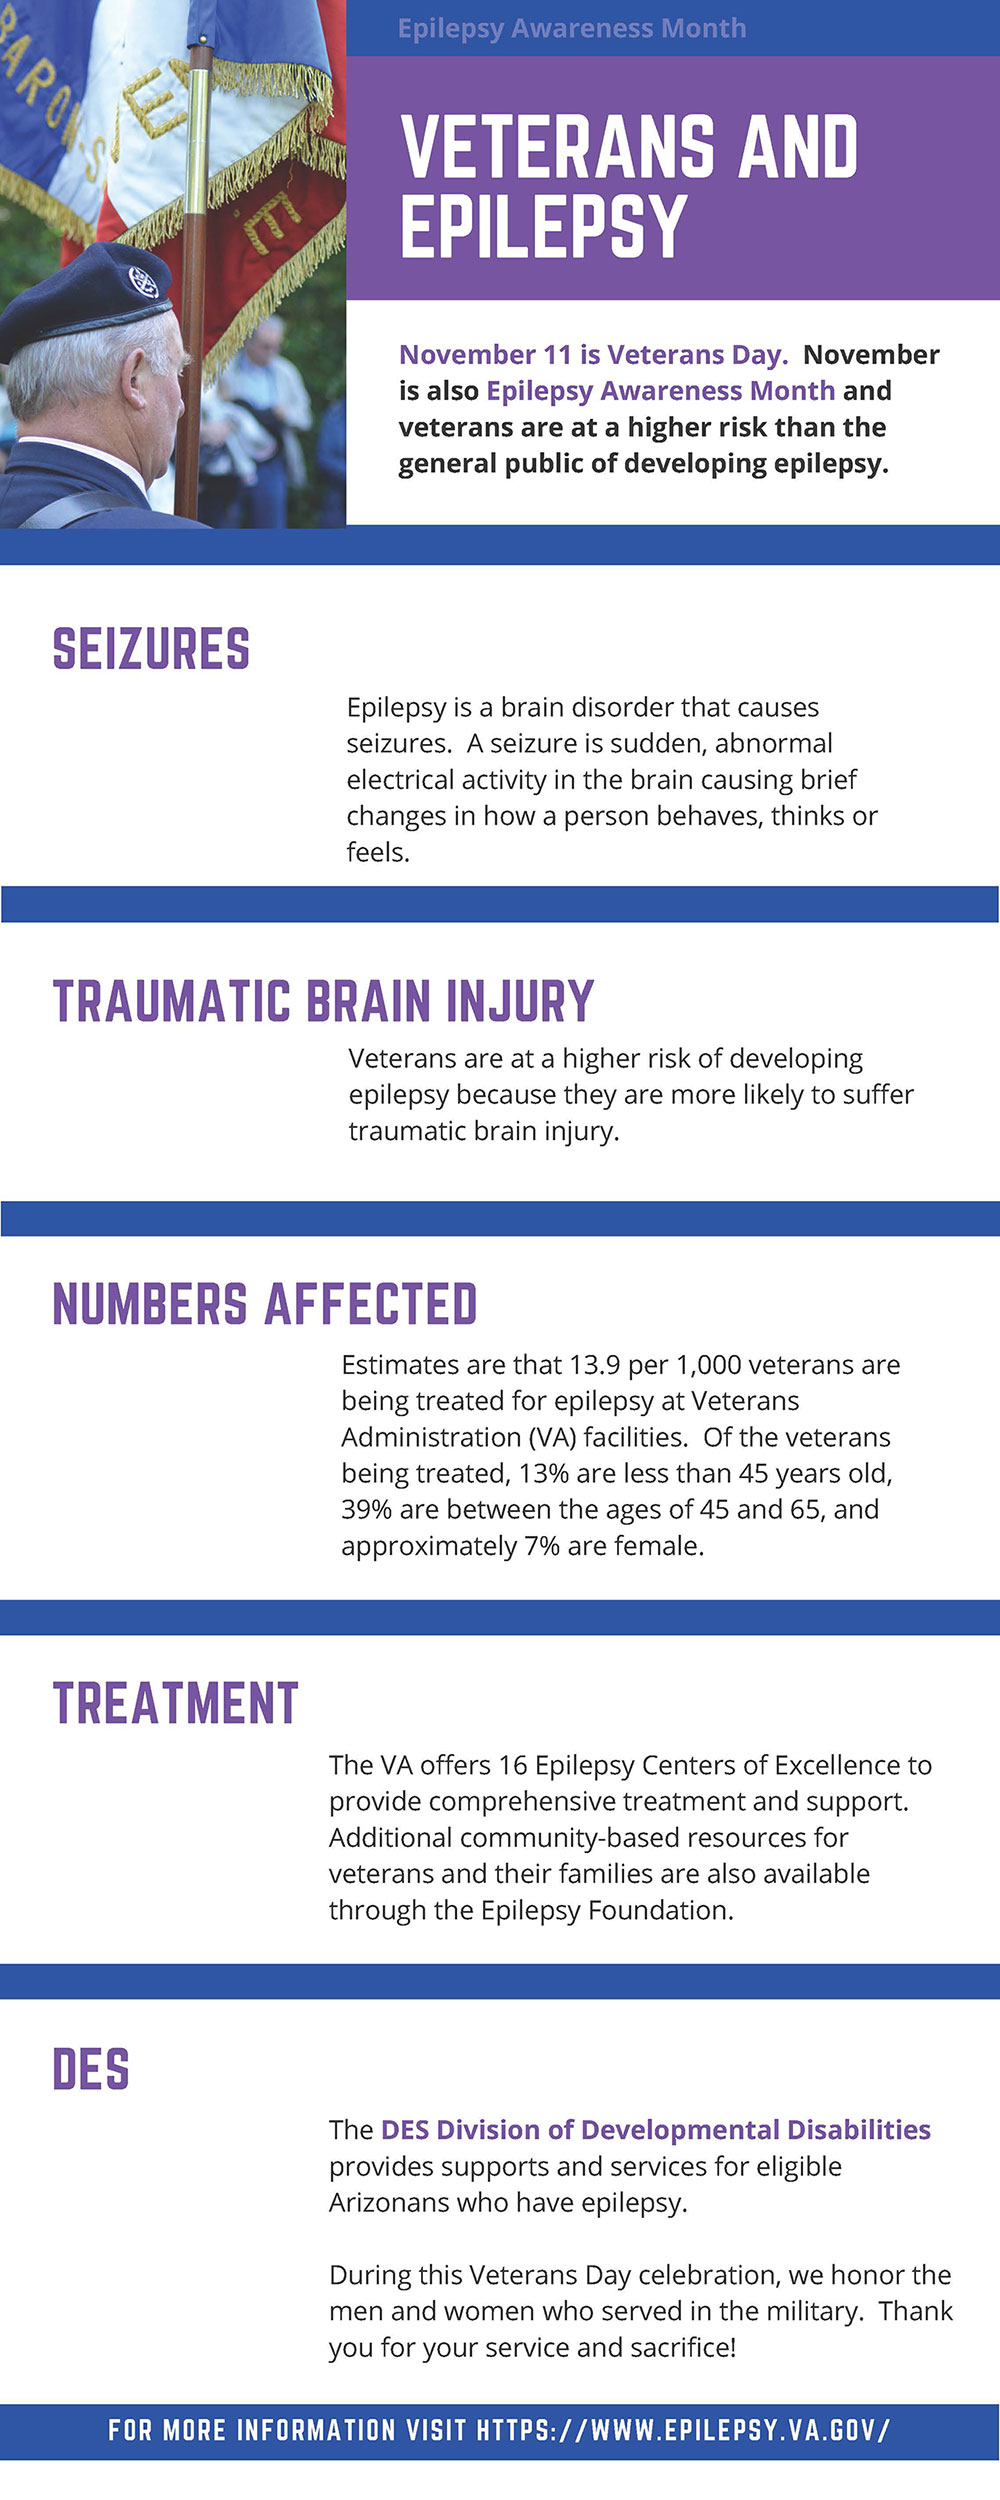 Facts about veterans and epilepsy